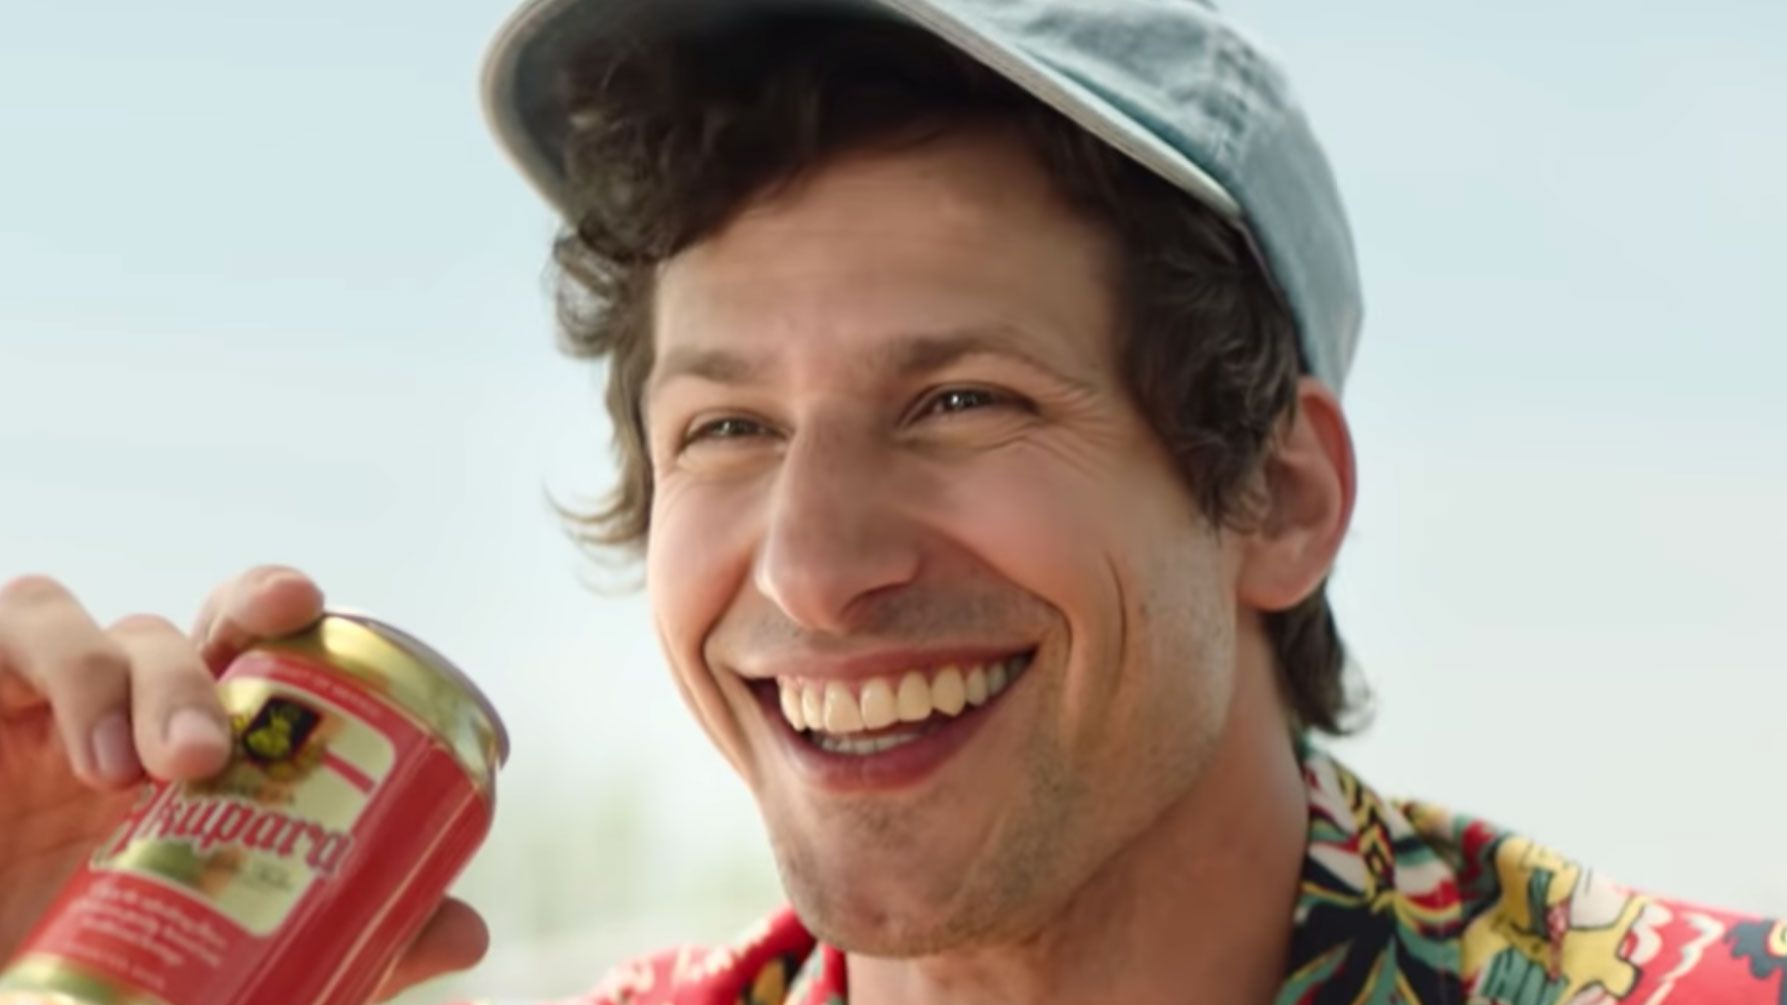 Andy Samberg Would Be a Good Doctor Octopus